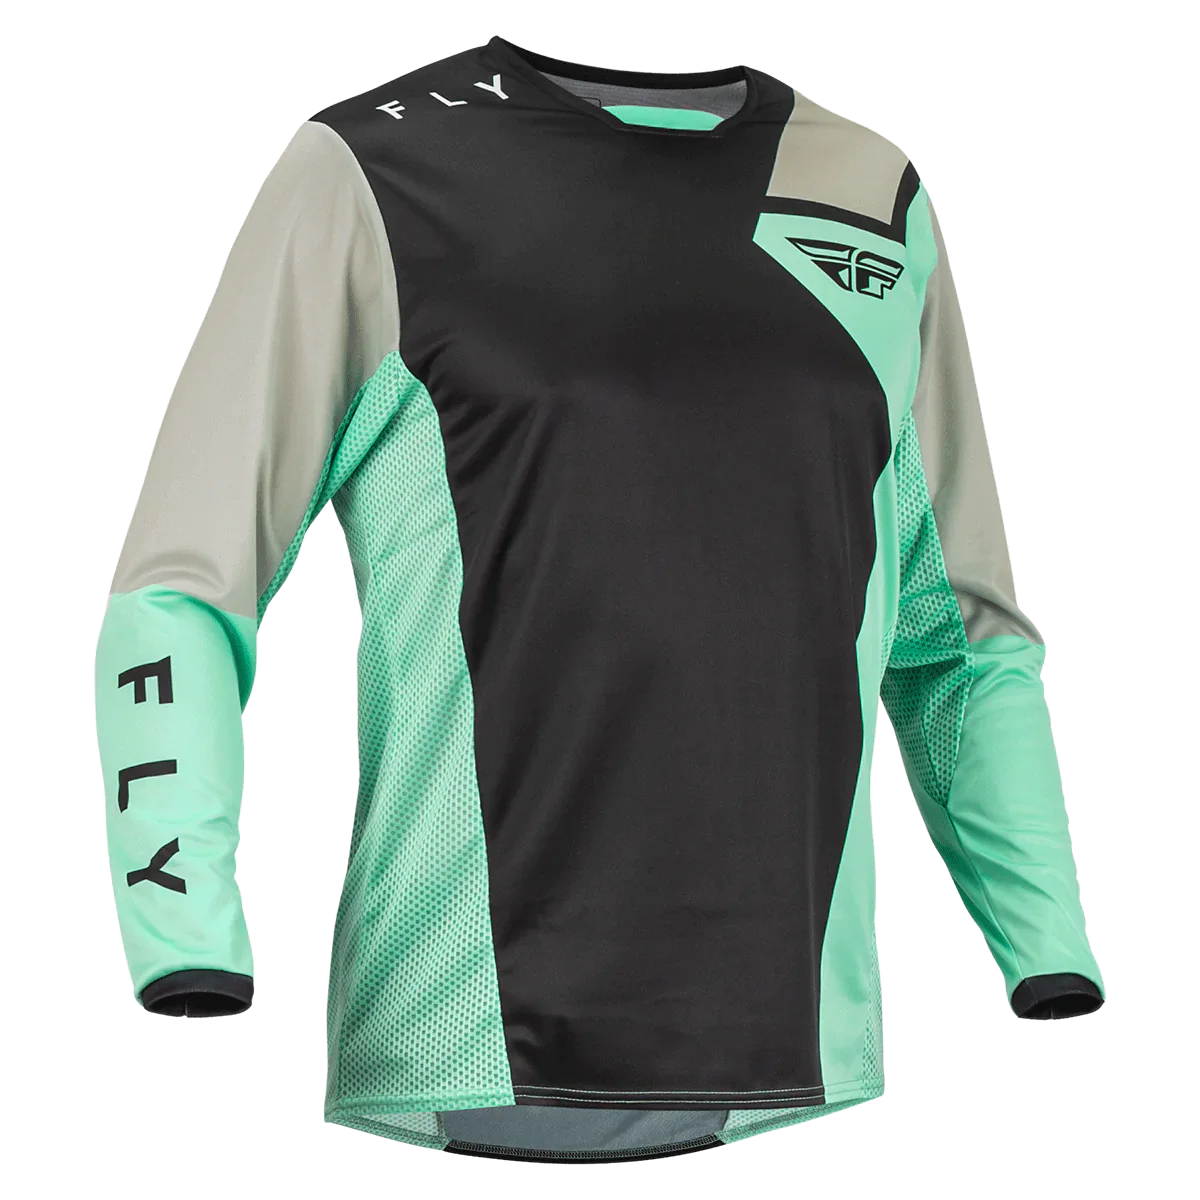 FLY Racing Men's Kinetic S.E. Jersey - Rave 376-520L